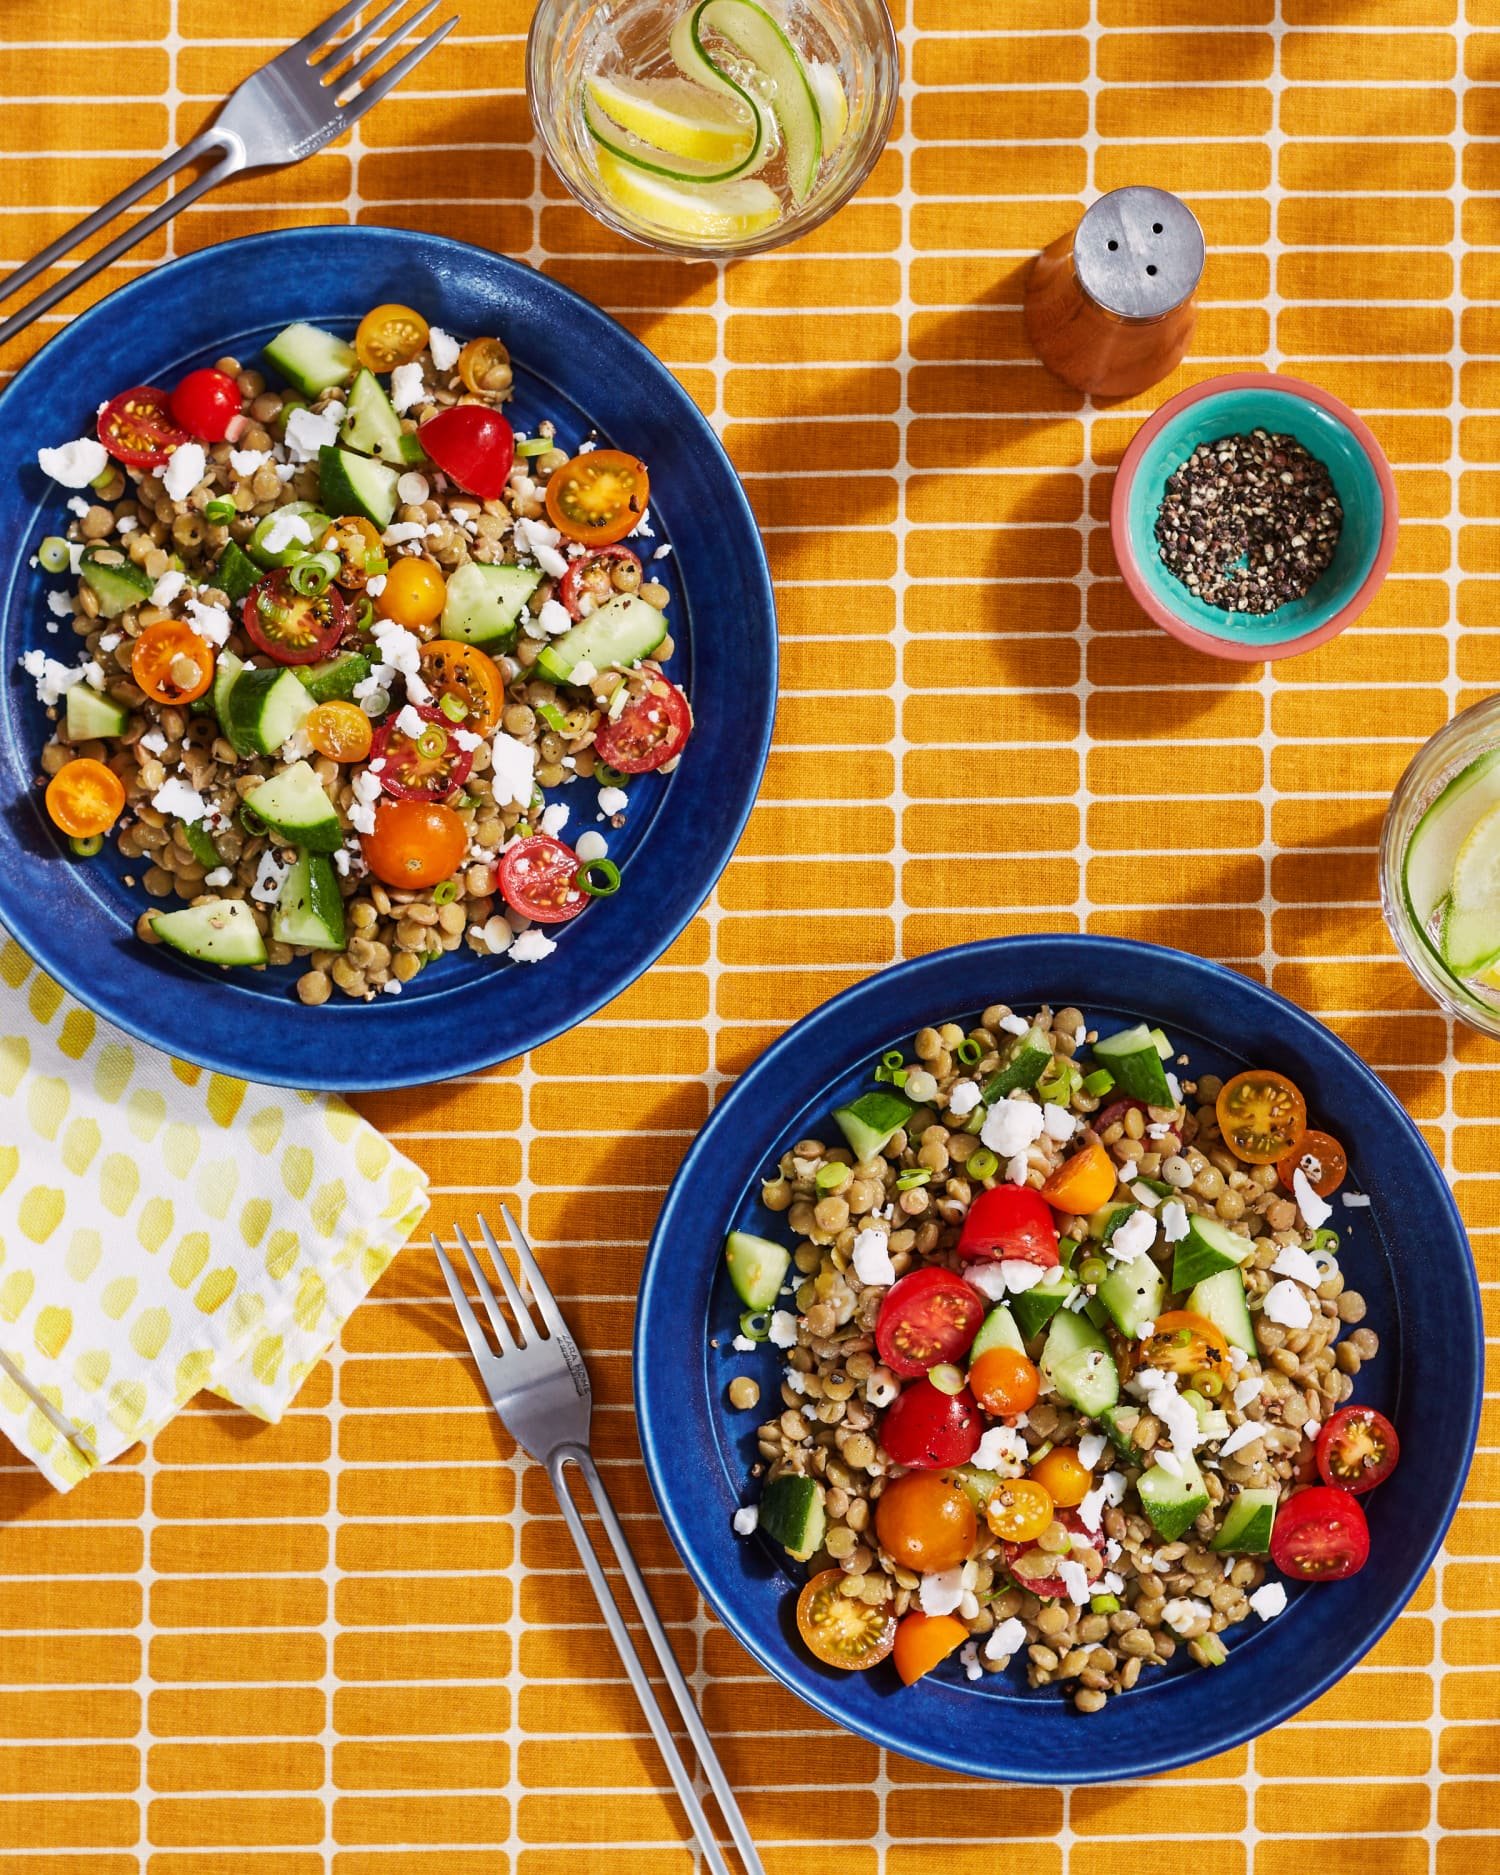 Marinated Lentils and Dairy-Free Feta Crumbles Star in This Fresh, Flavor-Packed Salad